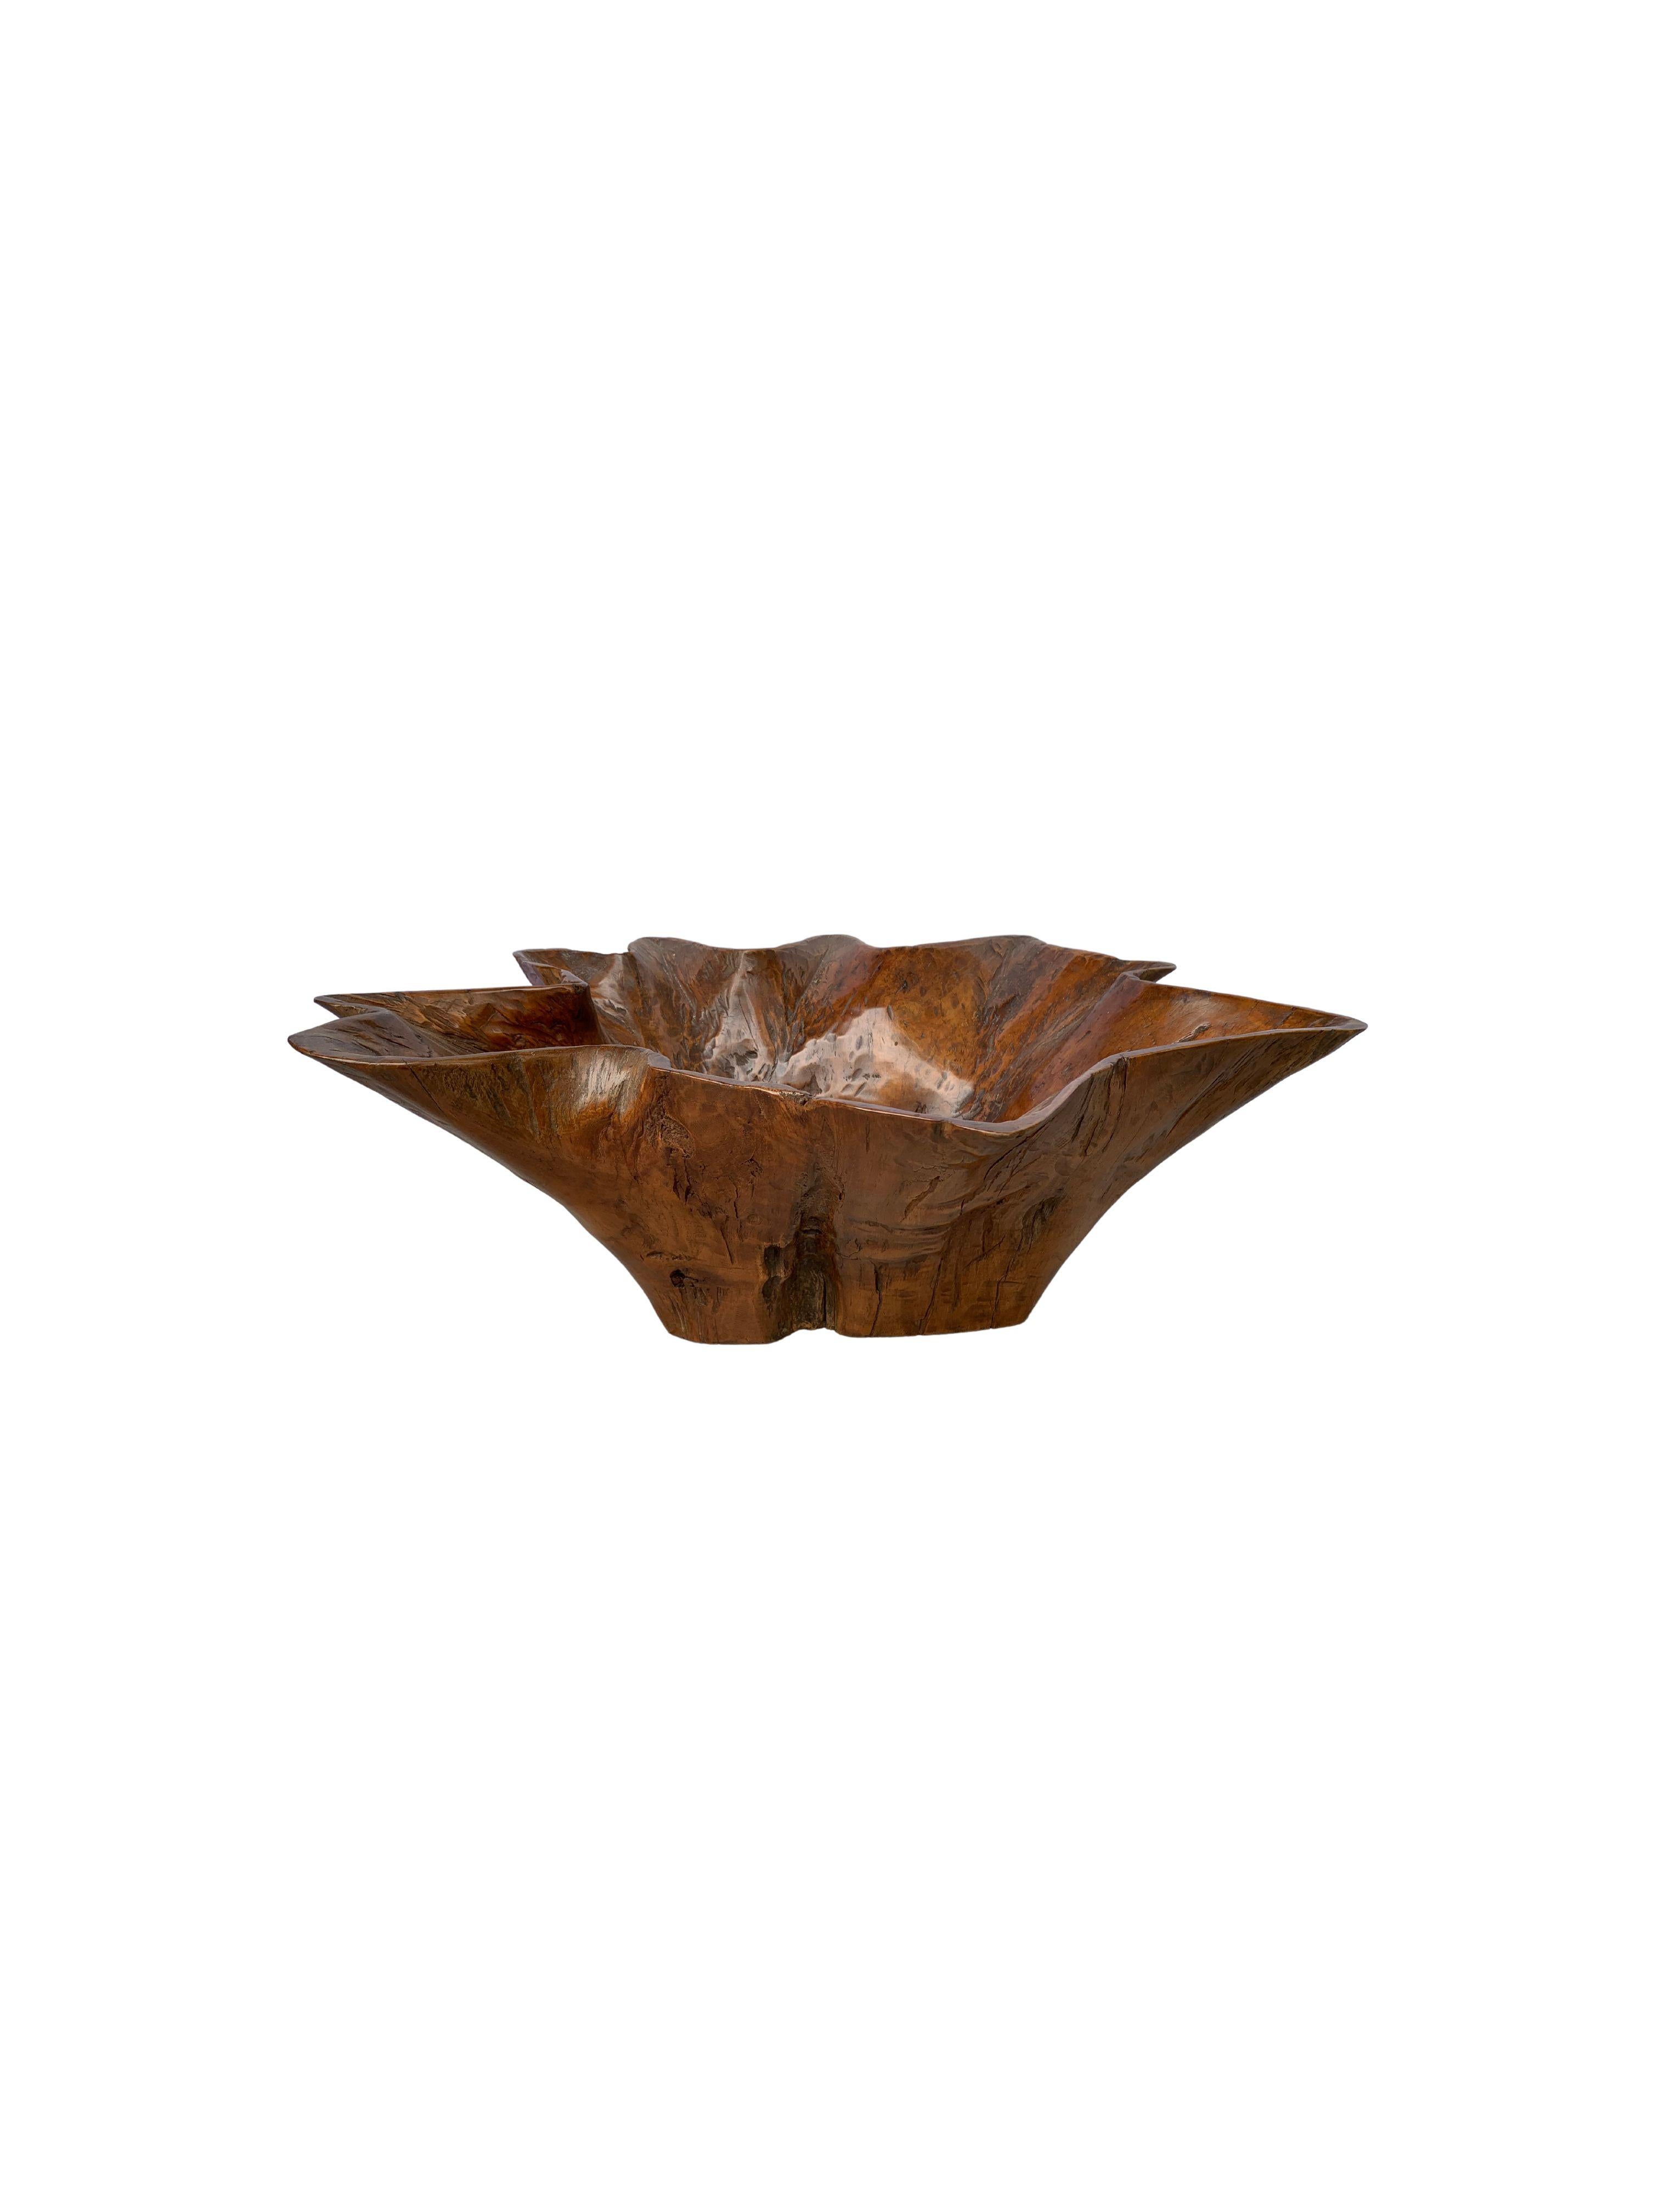 A teak wood bowl crafted on the island of Java, Indonesia. The bowl was cut from the part of the tree where the main trunk branches out. A wonderful piece of craftsmanship leading to a wonderfully shaped bowl. 

